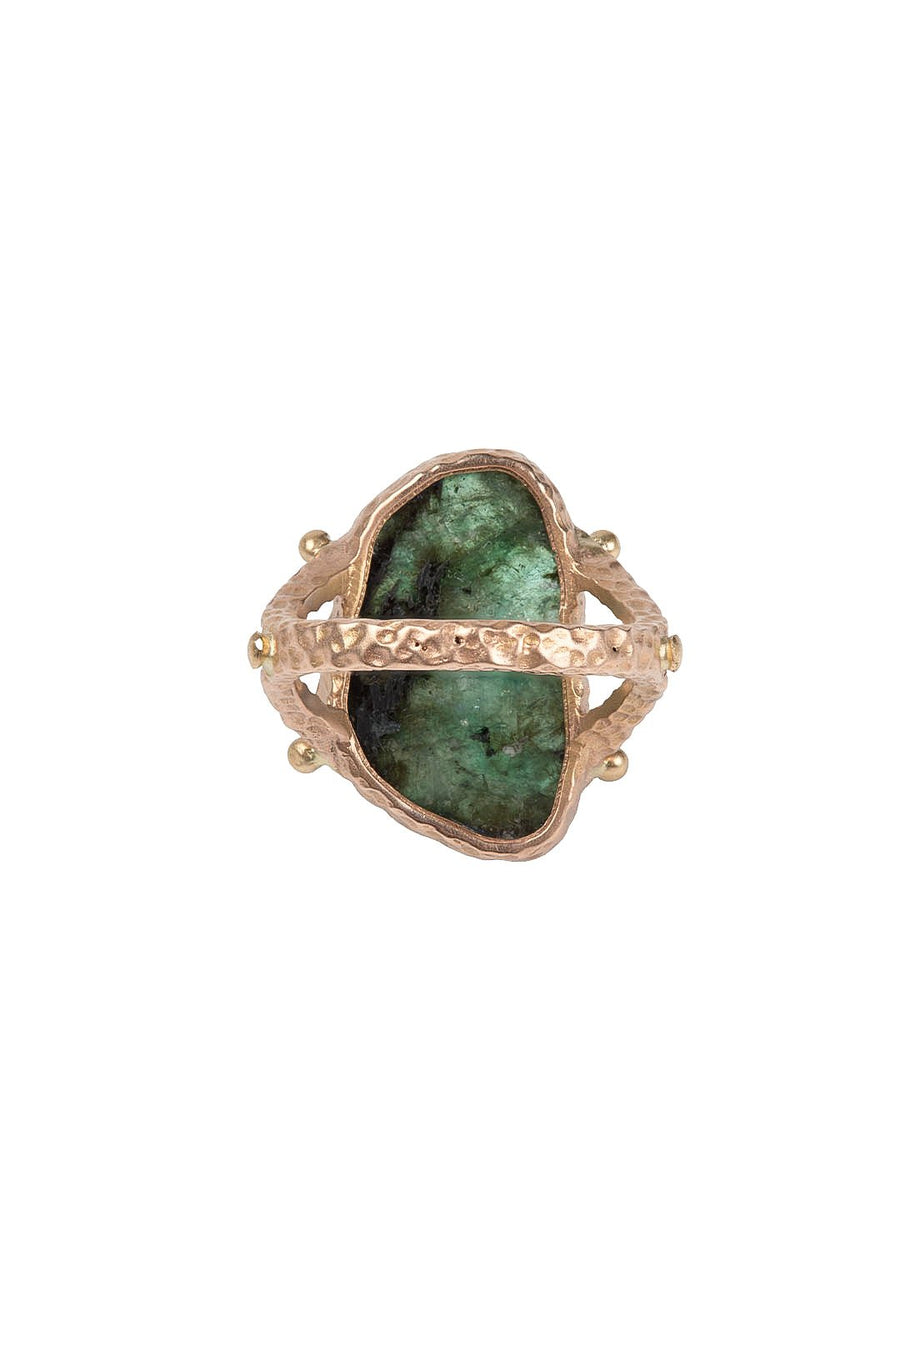 FREEFORM EMERALD RING, EMERALD - Burning Torch Online Boutique